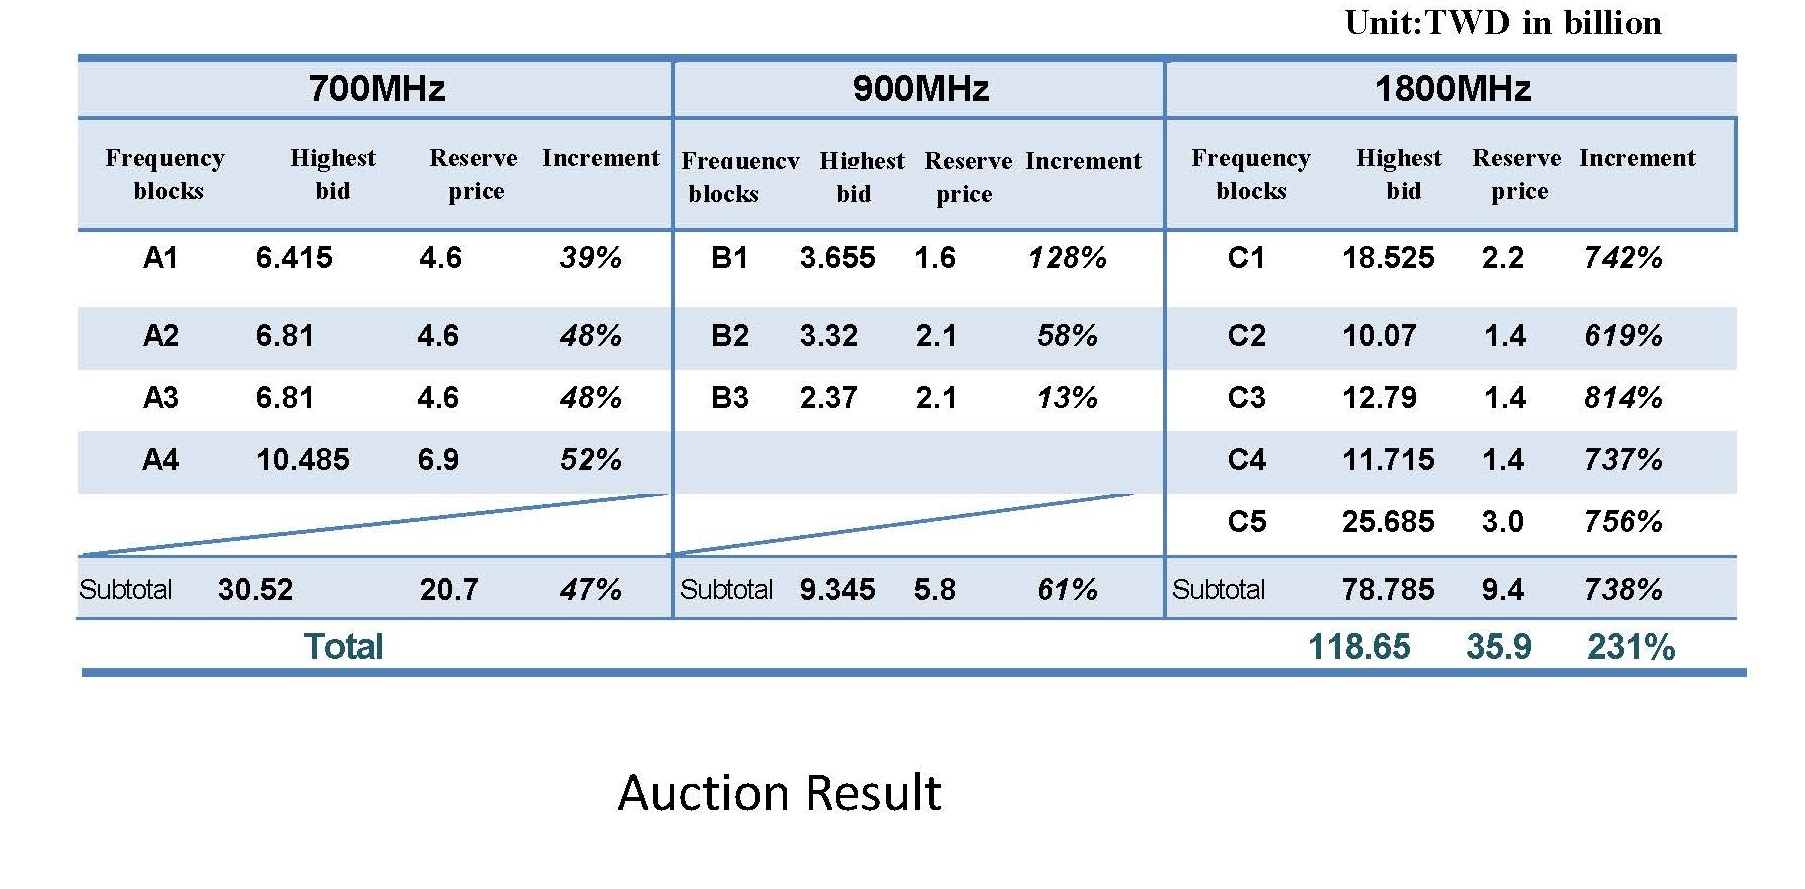 700 MHz, 900 MHz, and 1800 MHz bands Auction Result